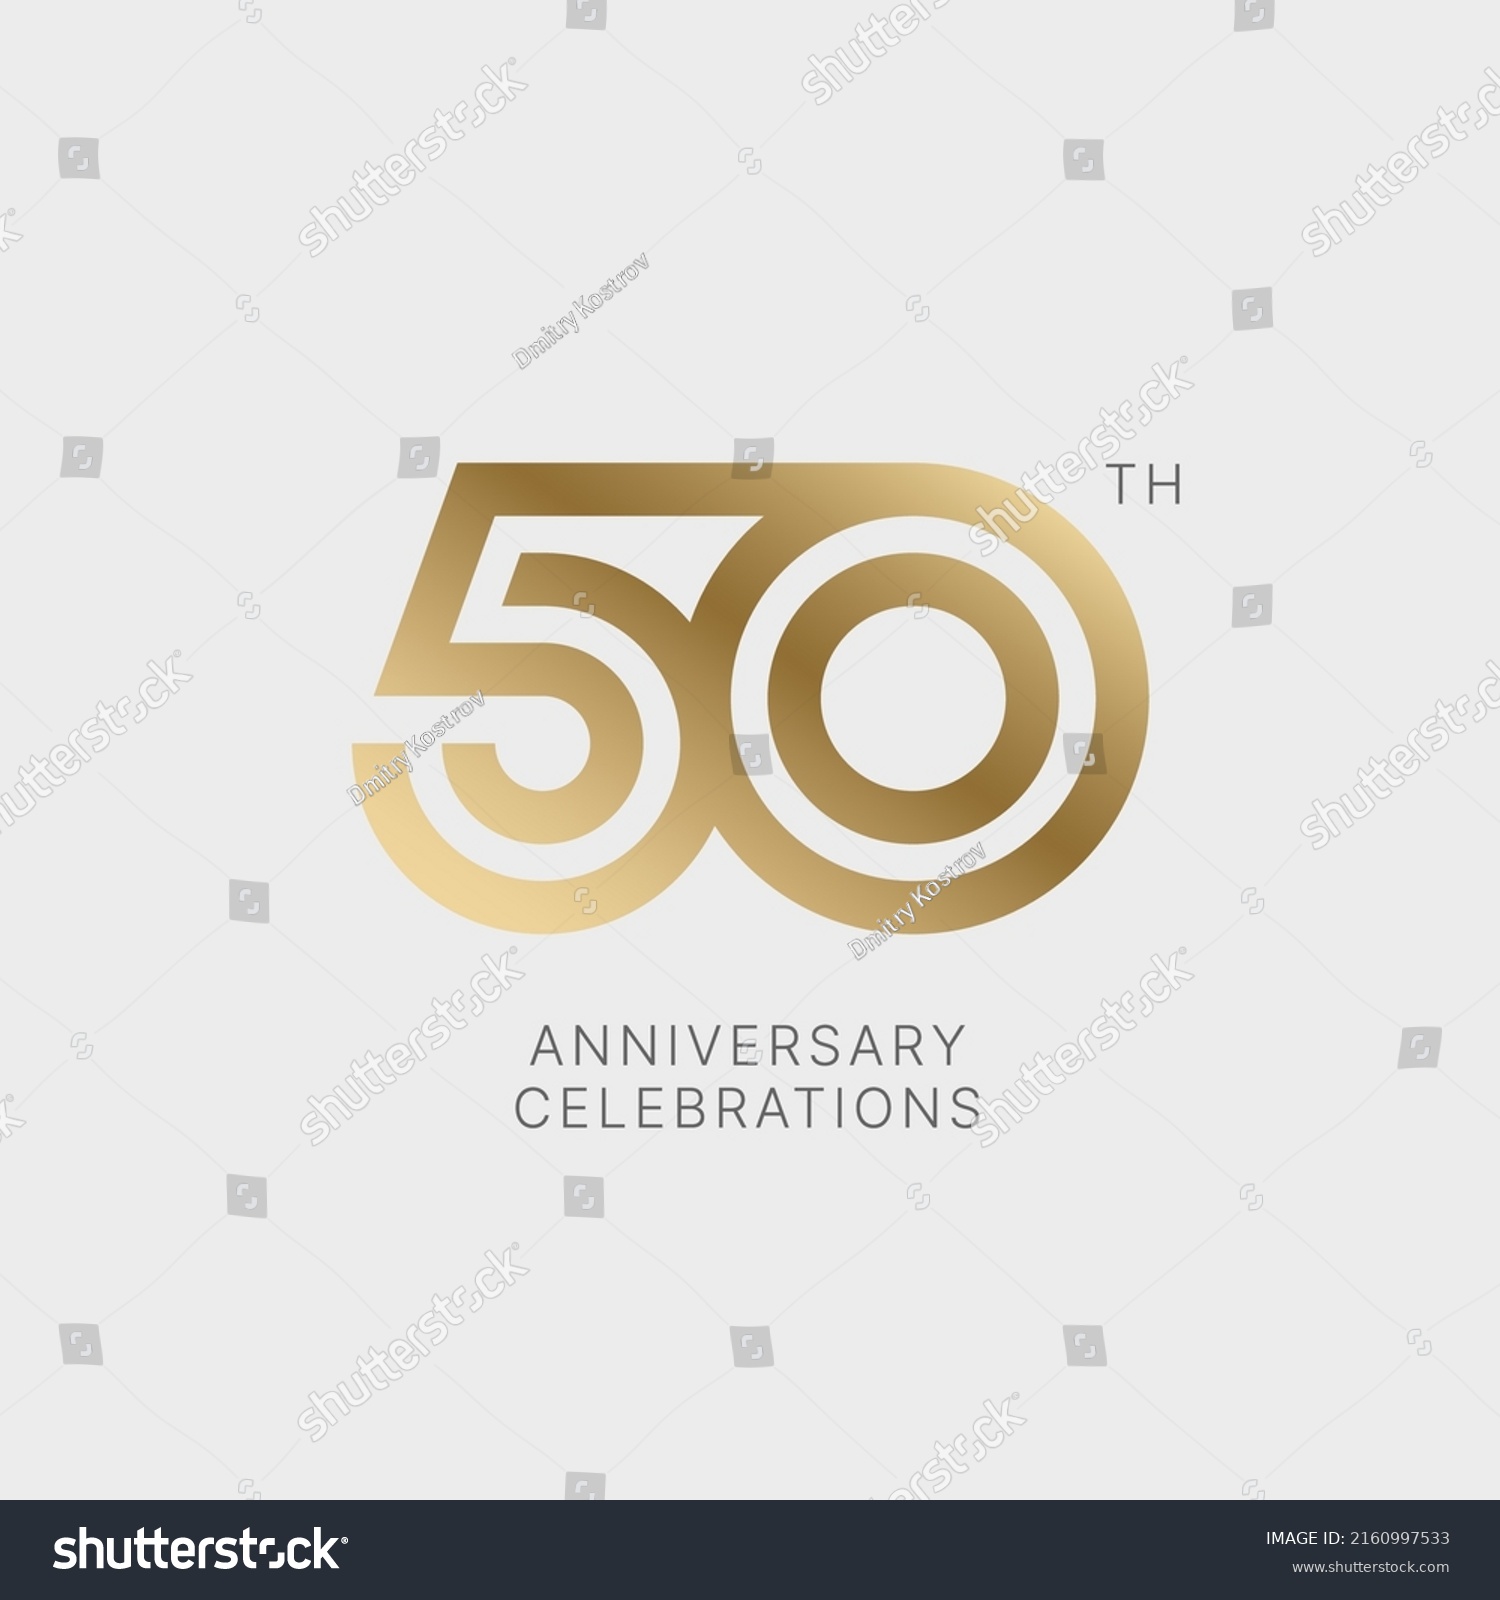 SVG of 50 years anniversary logo design on white background for celebration event. Emblem of the 50th anniversary. svg